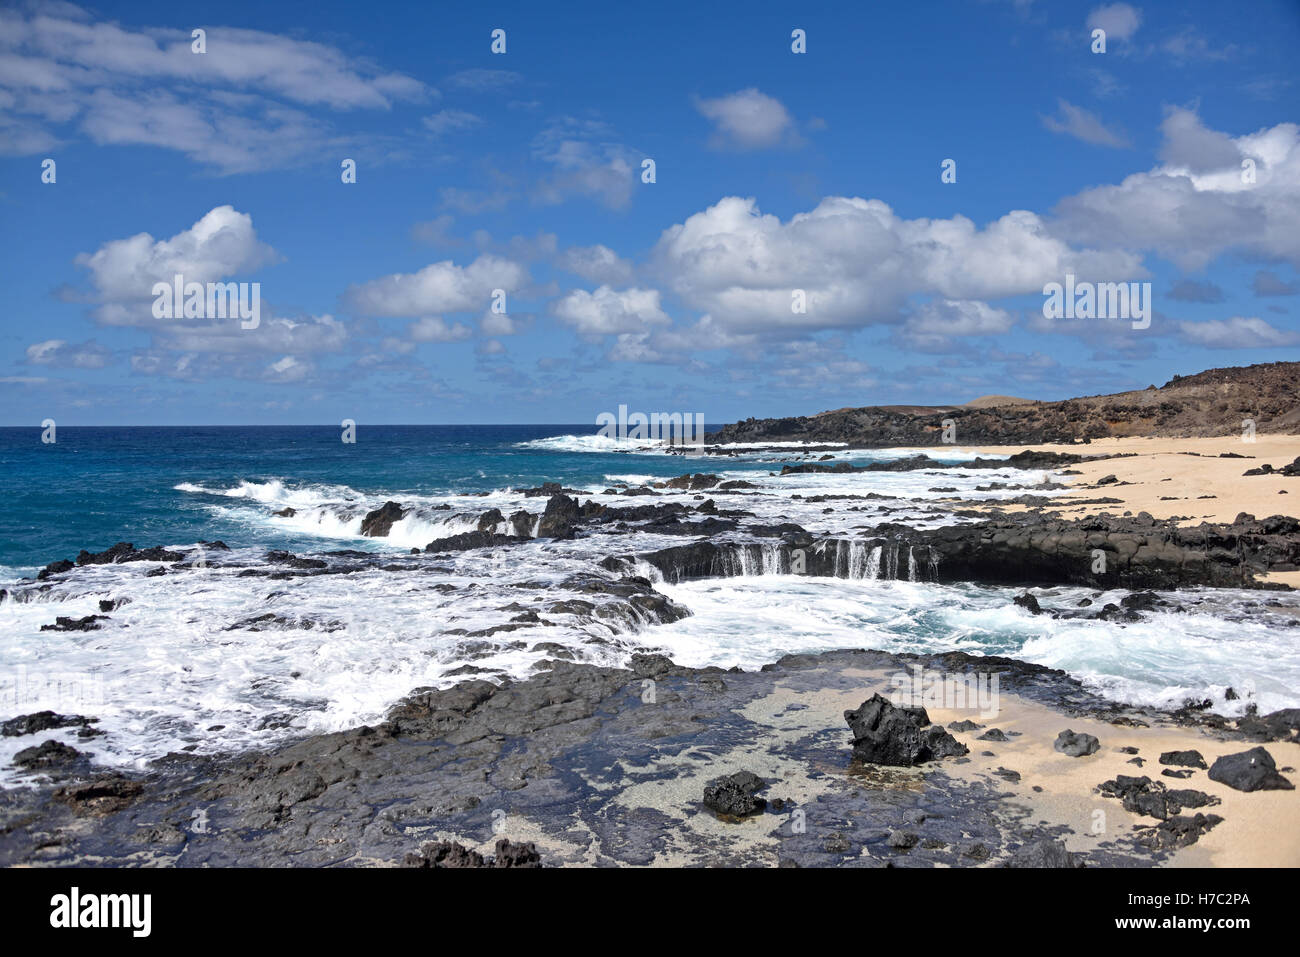 The sea appears to be boiling at Hummock Point on the North East coast of Ascension Island Stock Photo